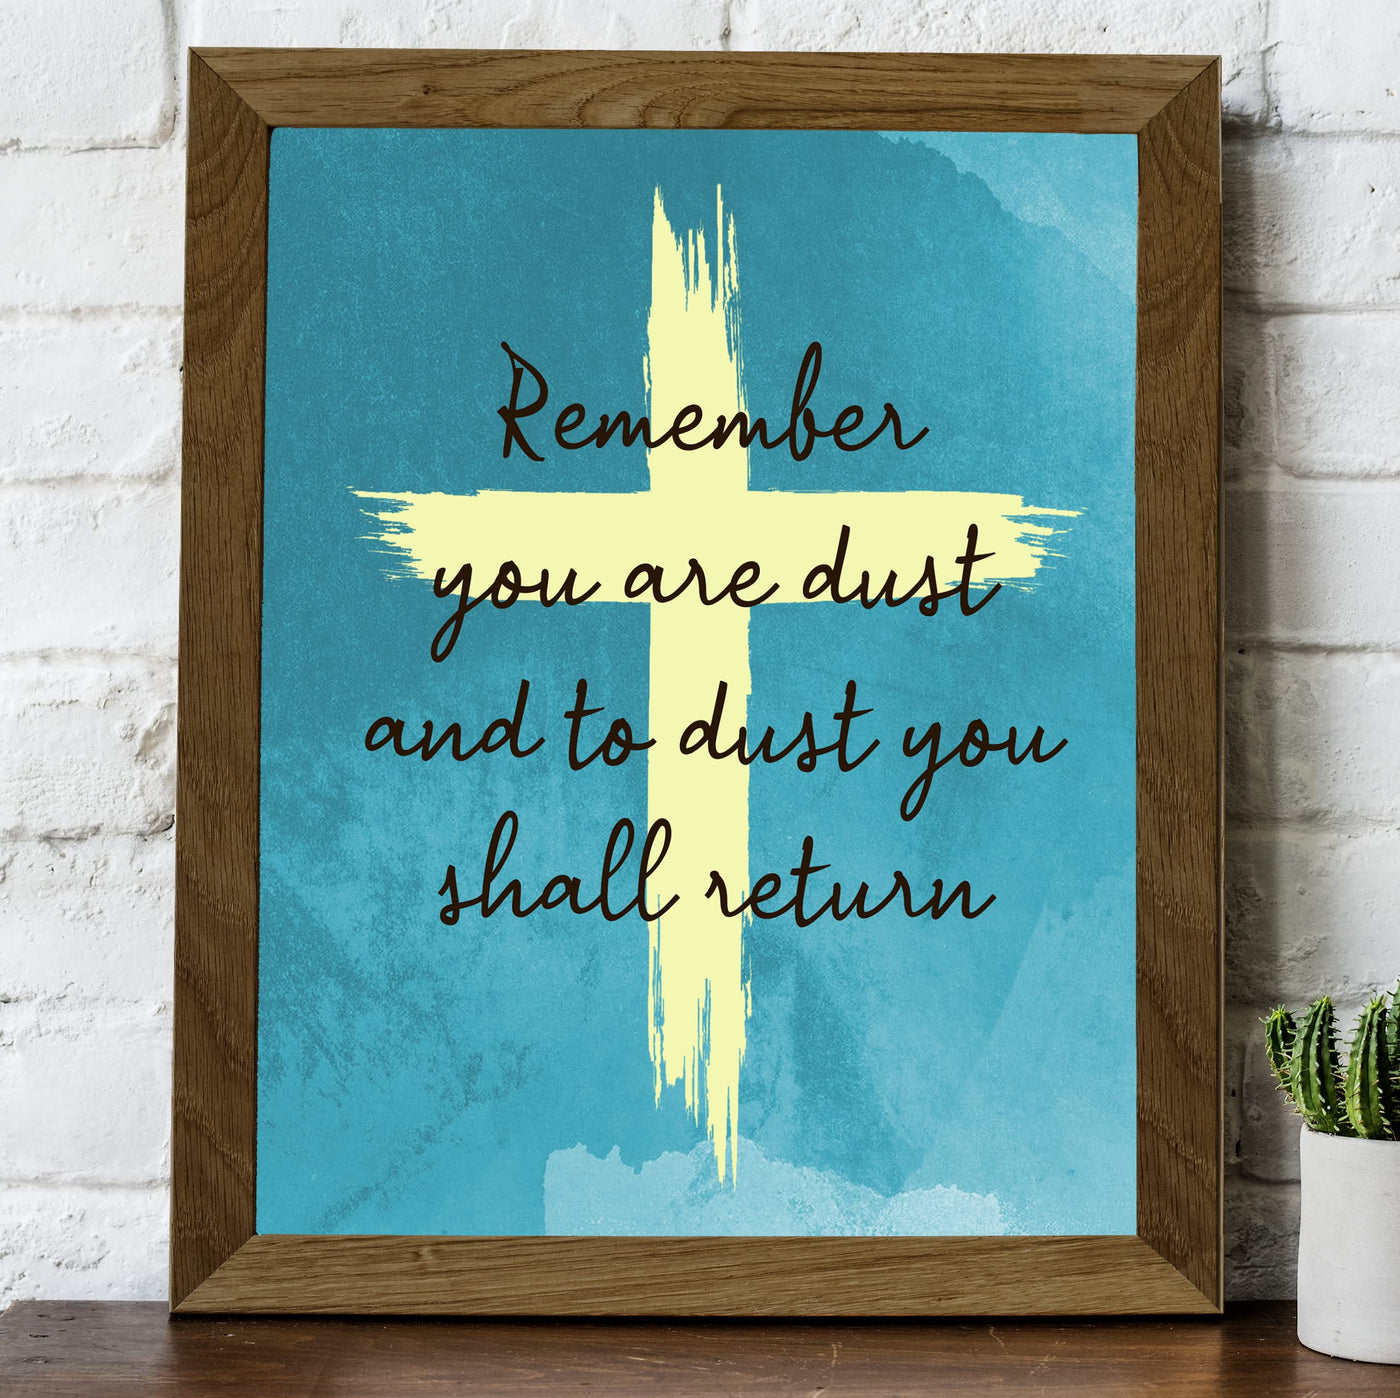 "You Are Dust & To Dust You Shall Return"- Bible Verse Cross Wall Art -8 x 10" Christian Scripture Print -Ready to Frame. Home-Office-Church Decor. Genesis 3:19. Great Religious Gift of Faith!